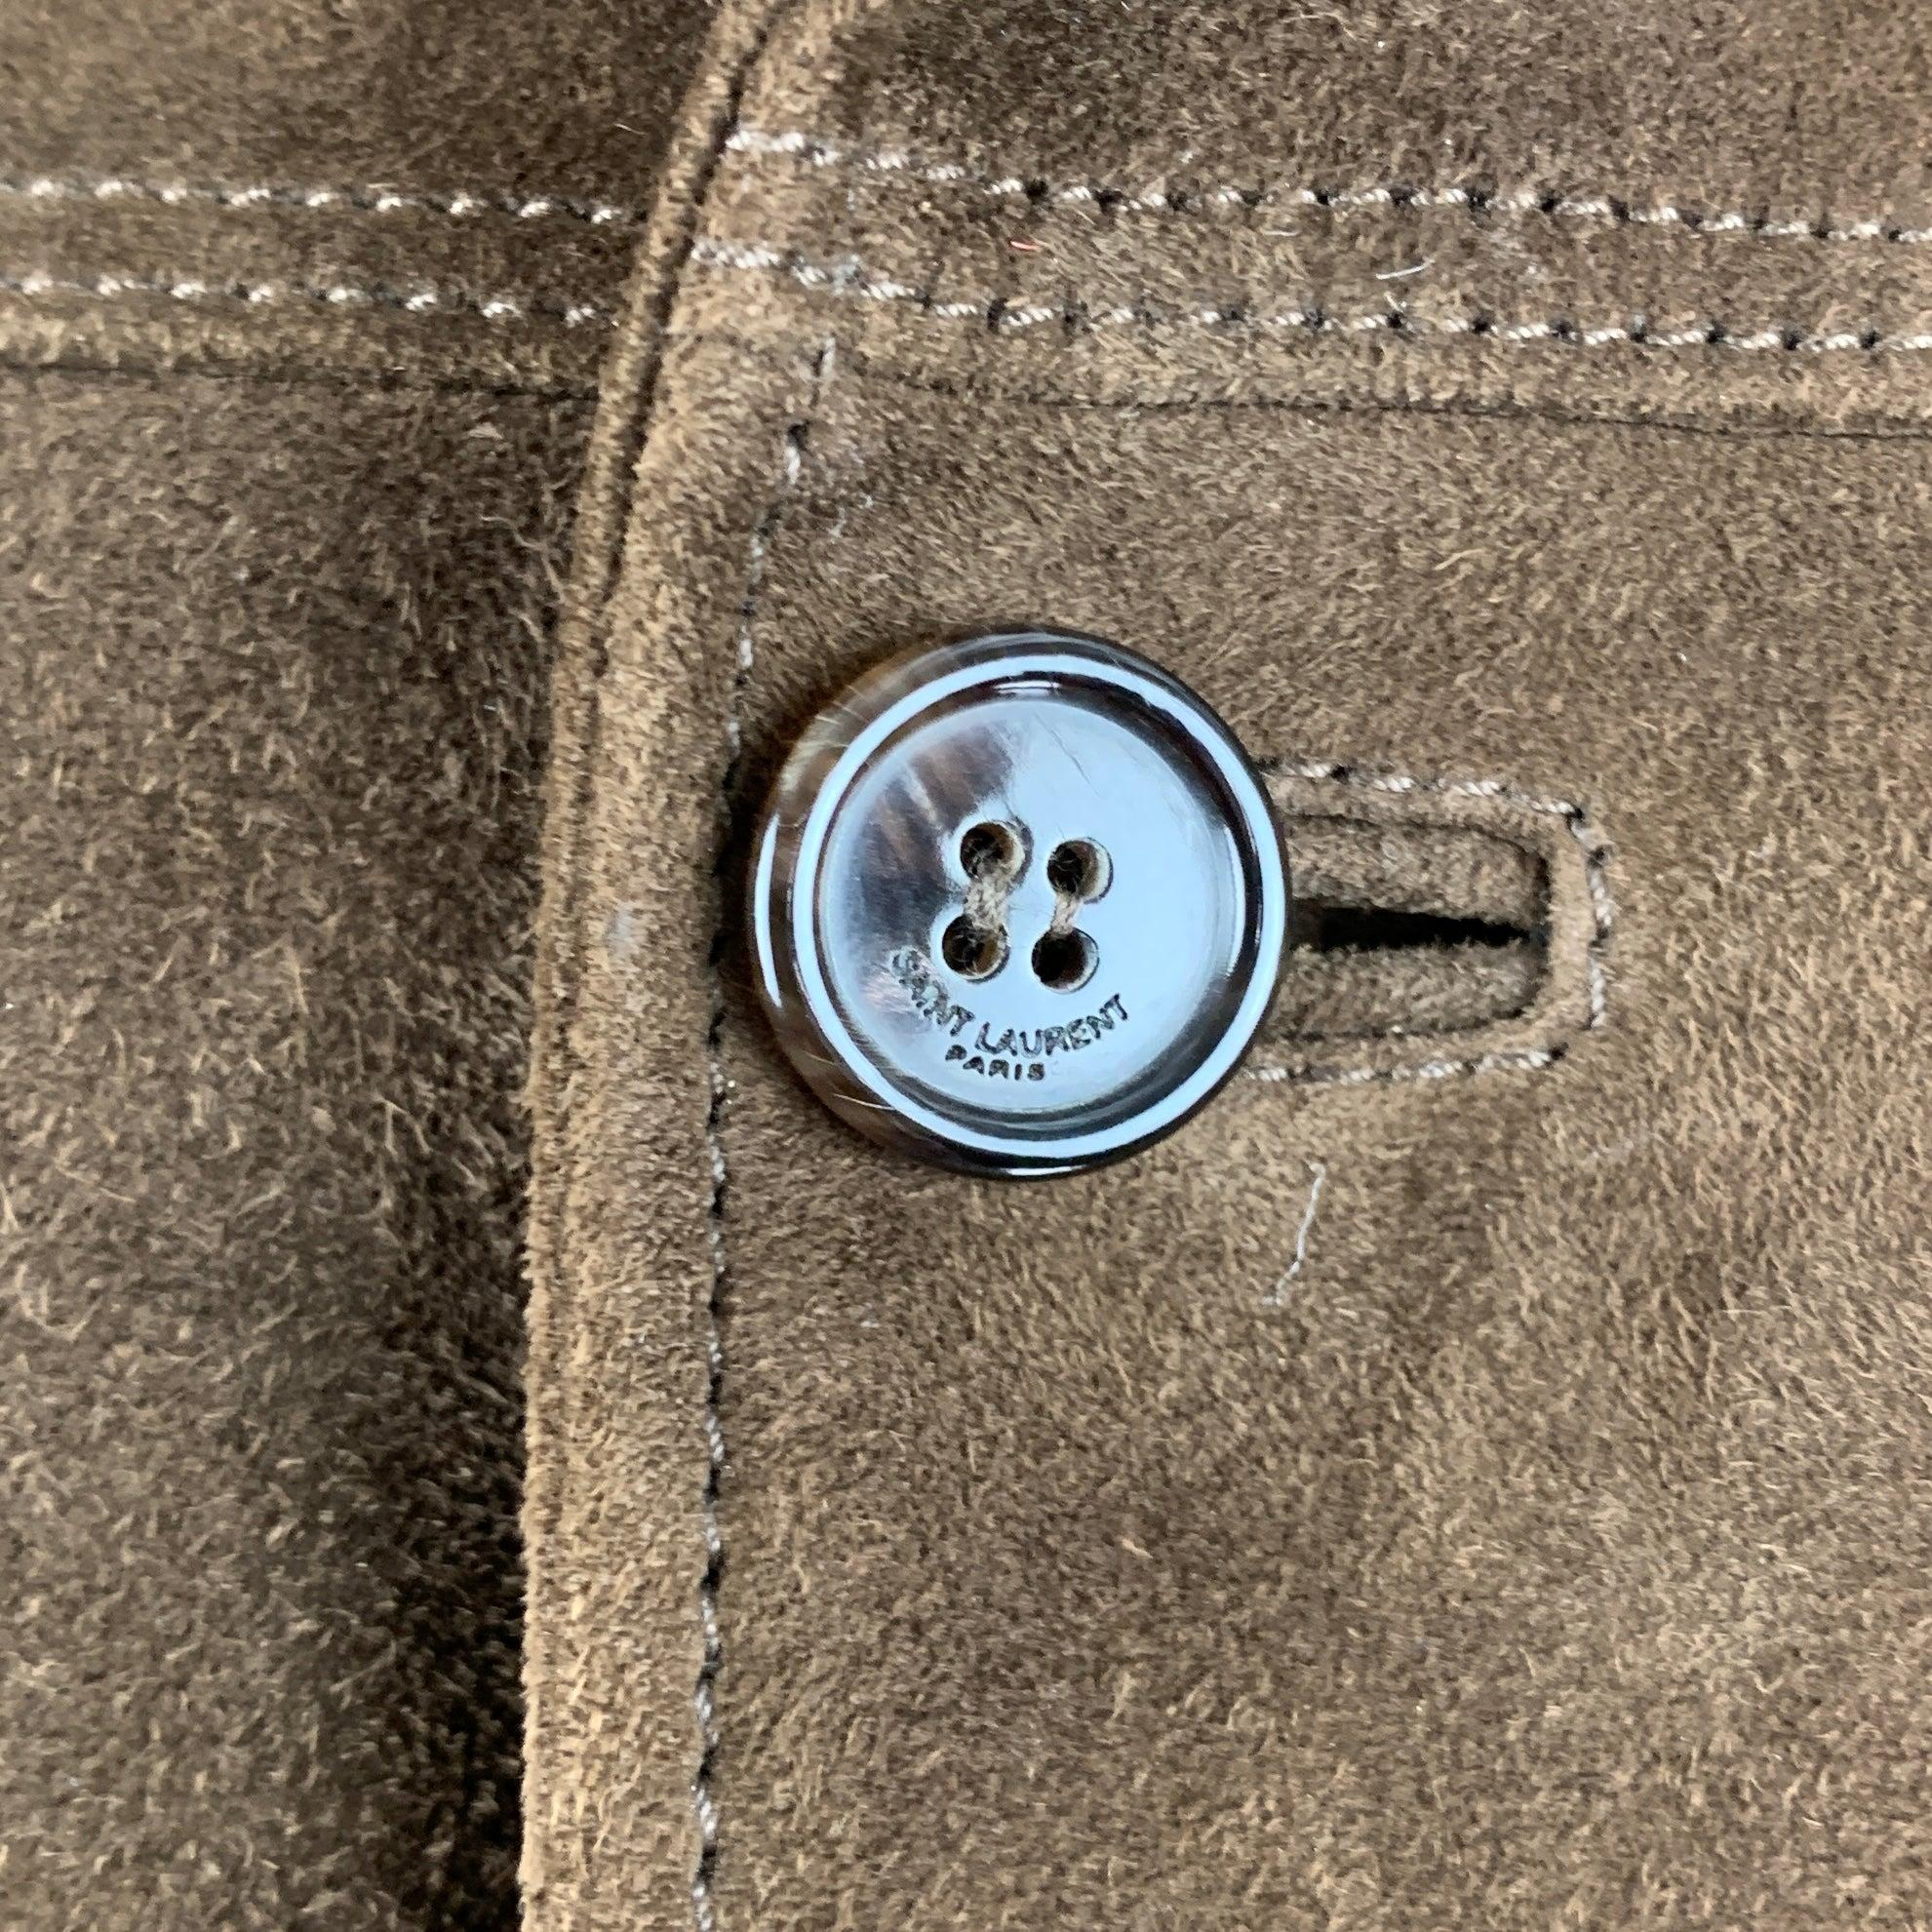 SAINT LAURENT jacket
in a brown suede fabric lined in silk featuring epaulettes, four pockets, and button closure. Made in Italy.Very Good Pre-Owned Condition. Moderate signs of wear. 

Marked:   54 

Measurements: 
 
Shoulder: 17.5 inches Chest: 44